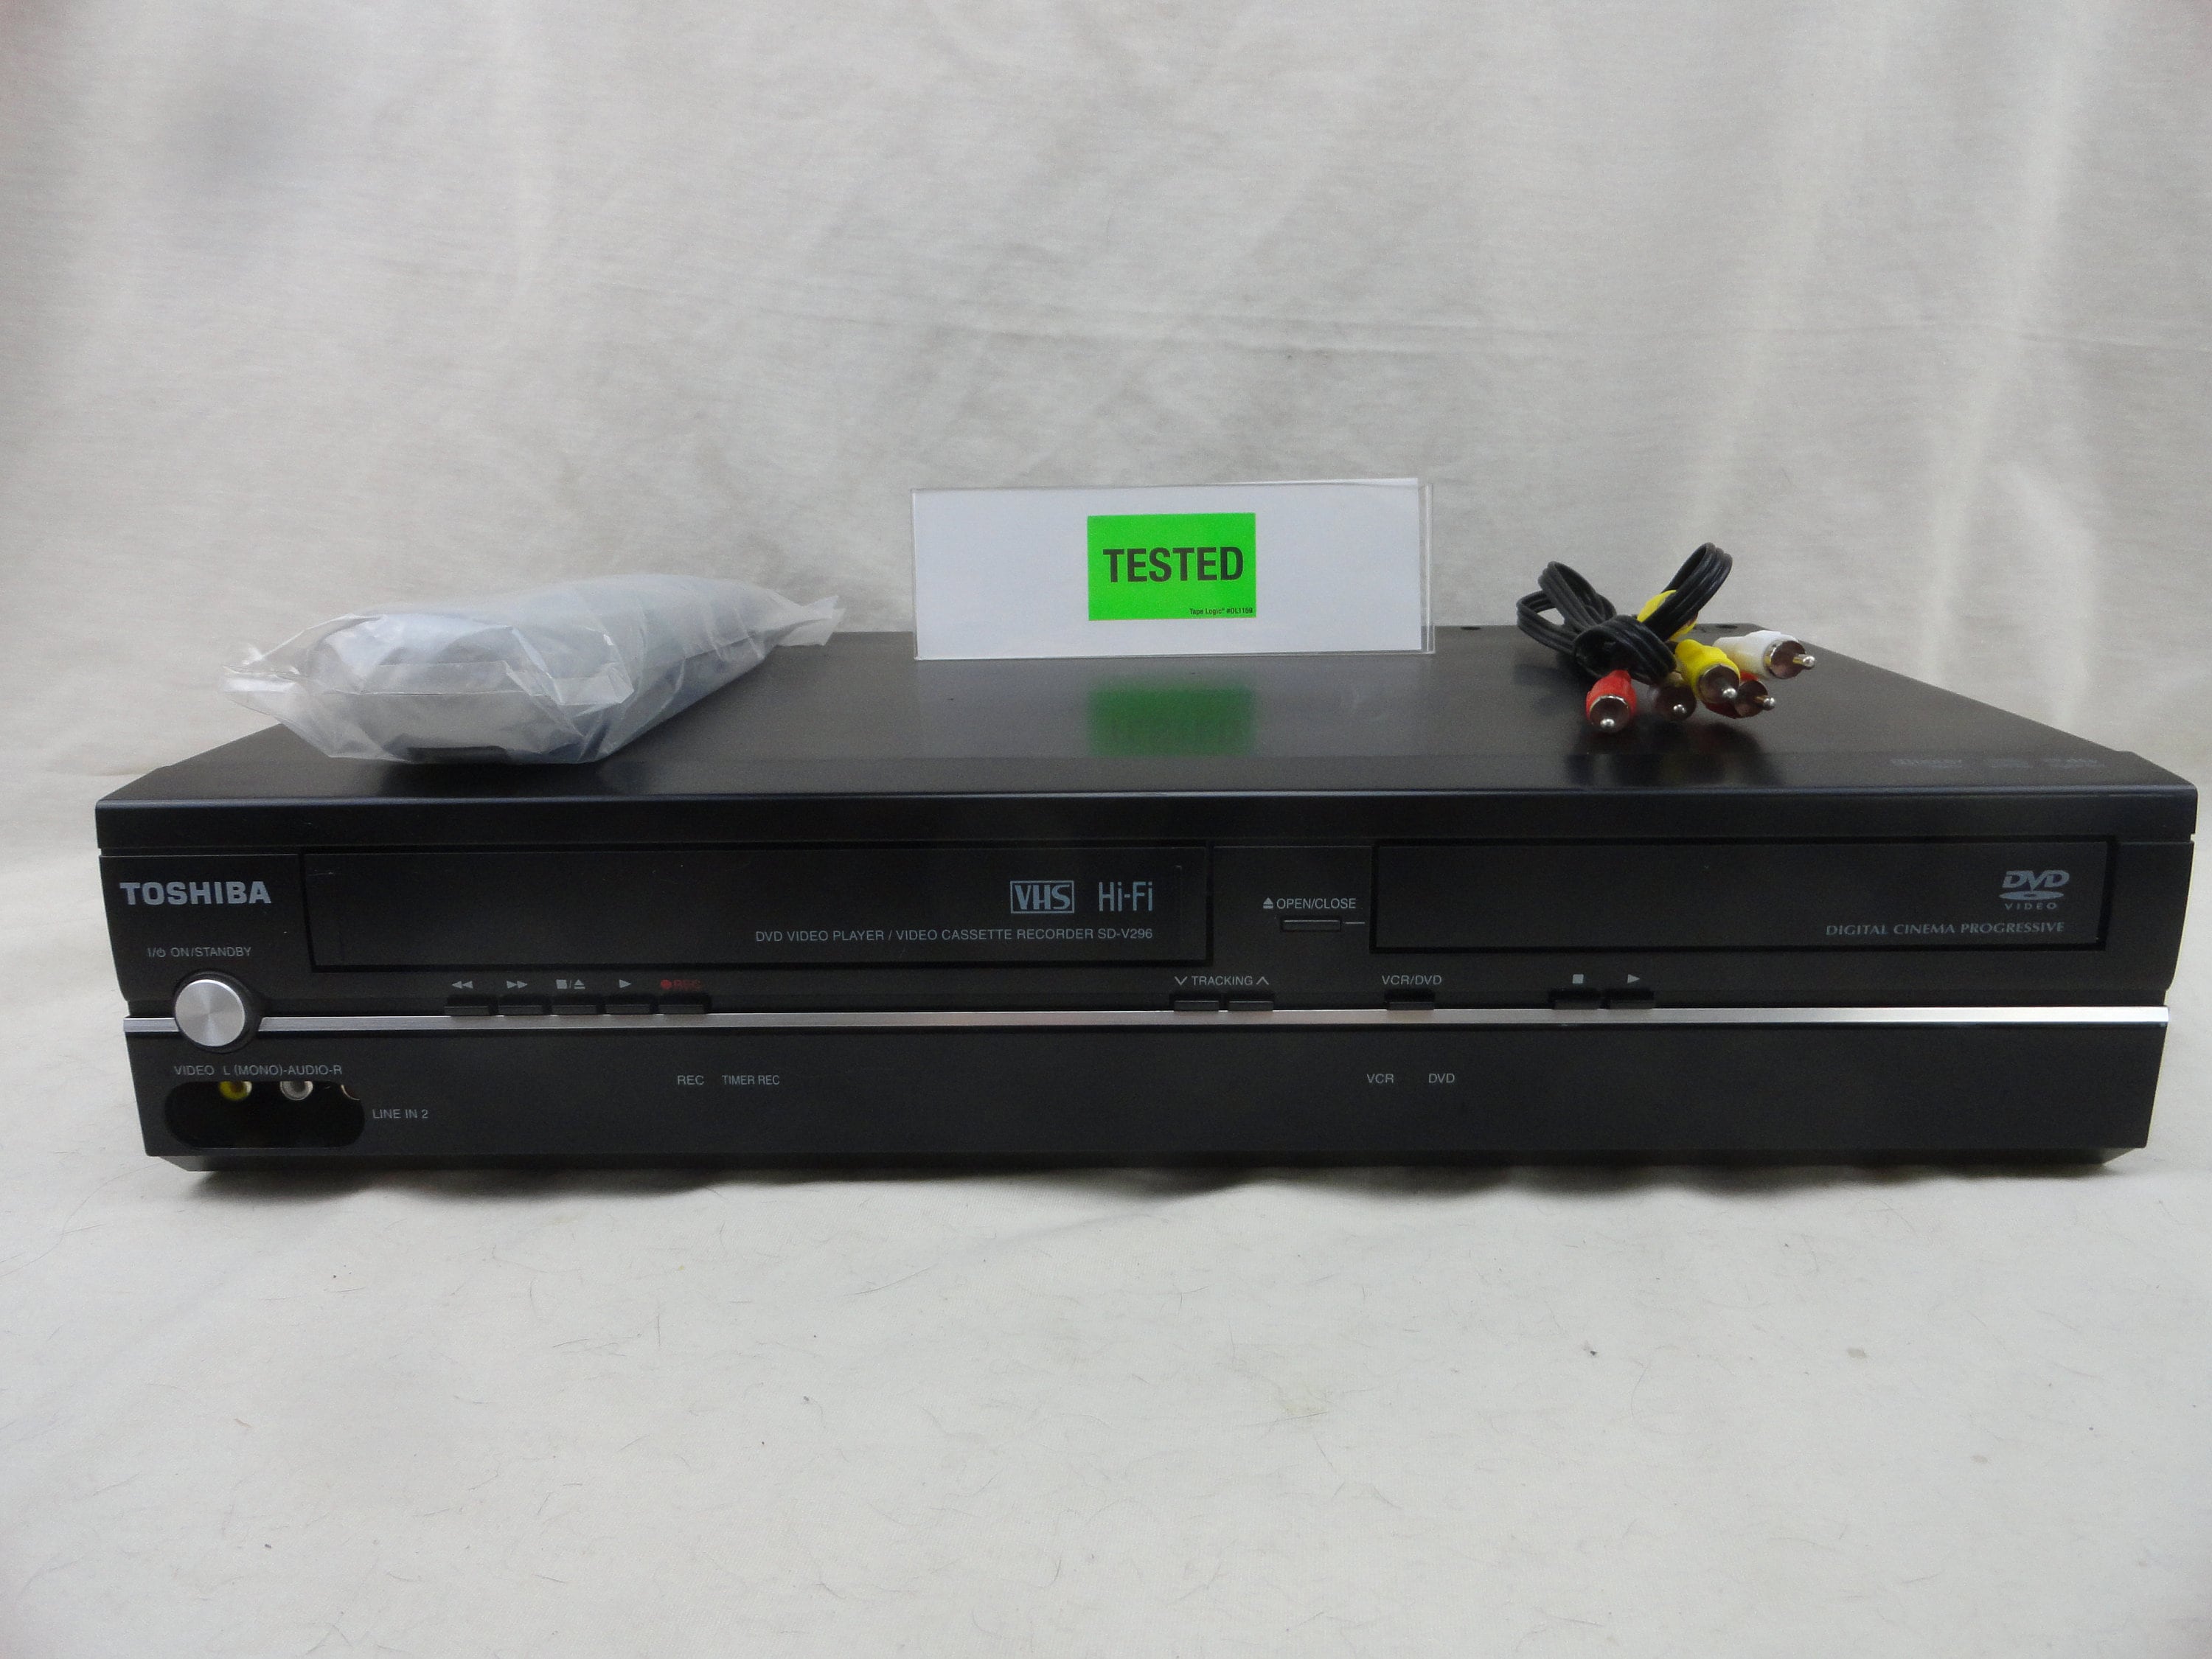 Go Video Dv1030 DVD VCR Combo DVD Player Vhs Player Combo With Hdmi Adapter  (New)